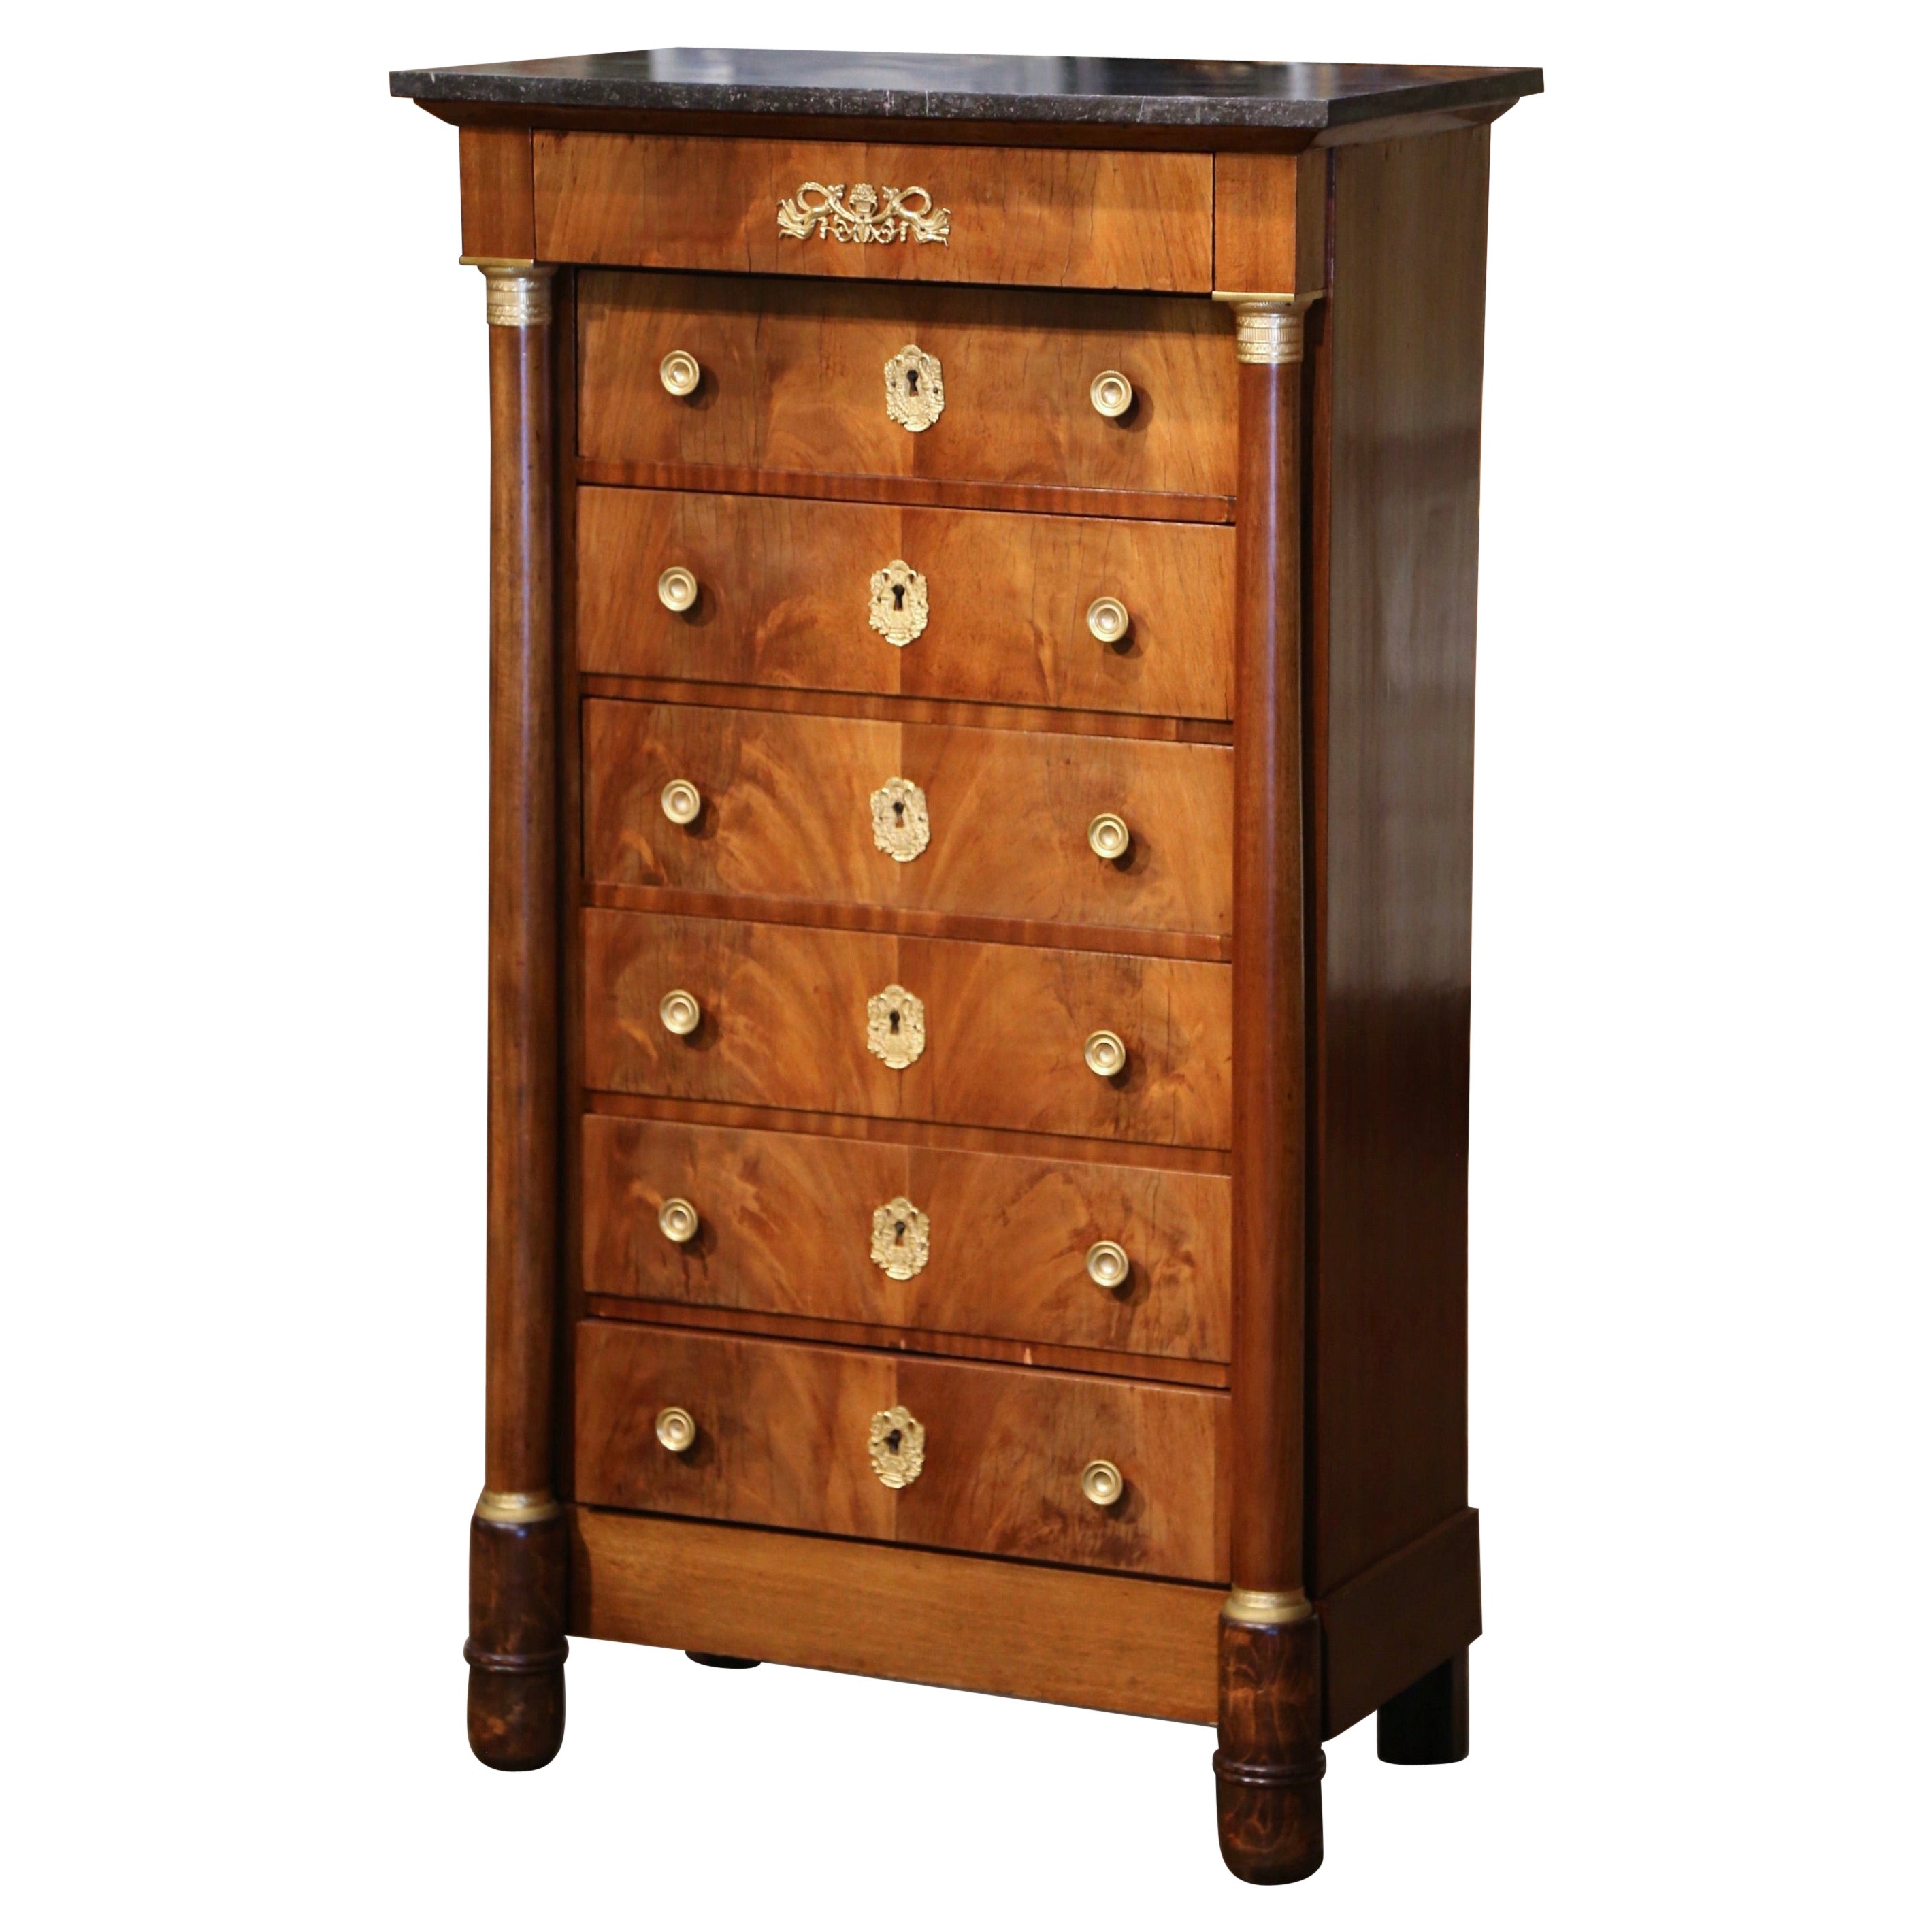 19th Century French Empire Marble Top Mahogany Semainier Chest of Drawers